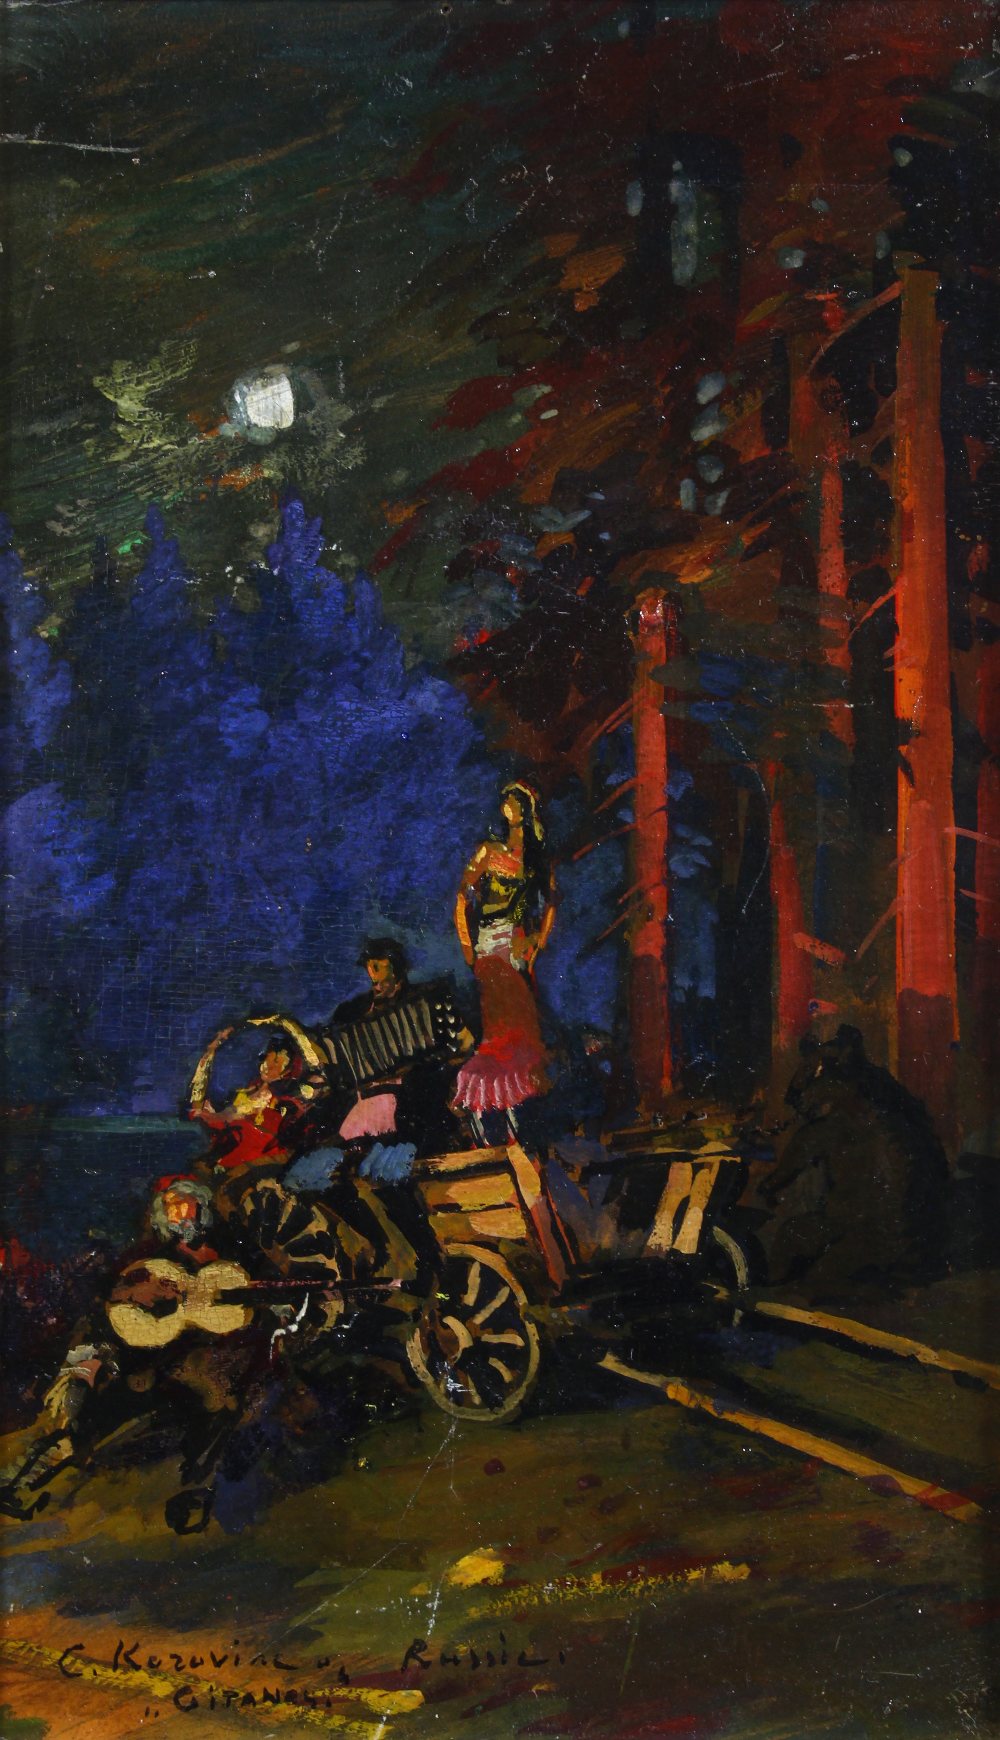 Konstantin Alexseyevitch Korovin (Russian, 1861-1939), "Gypsies," oil on board, signed and titled